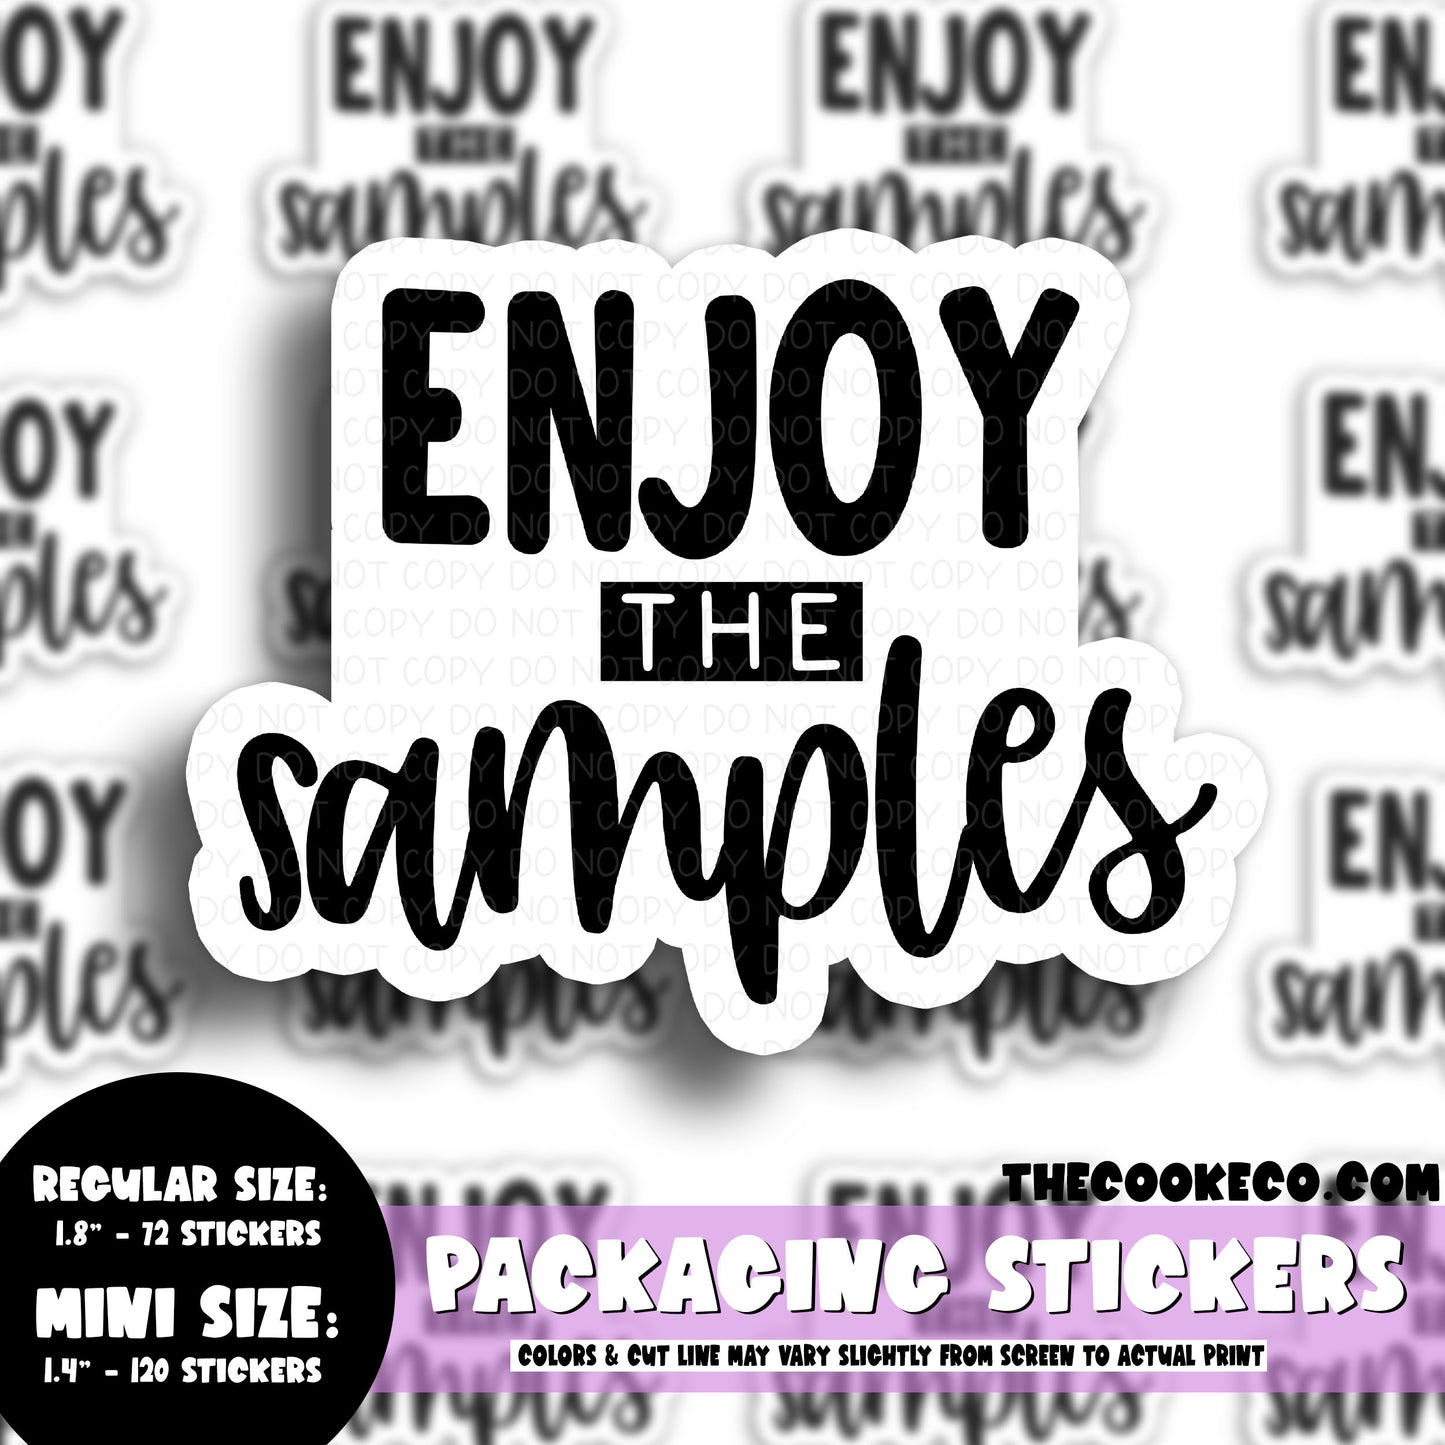 Packaging Stickers | #BW0168 - ENJOY THE SAMPLES